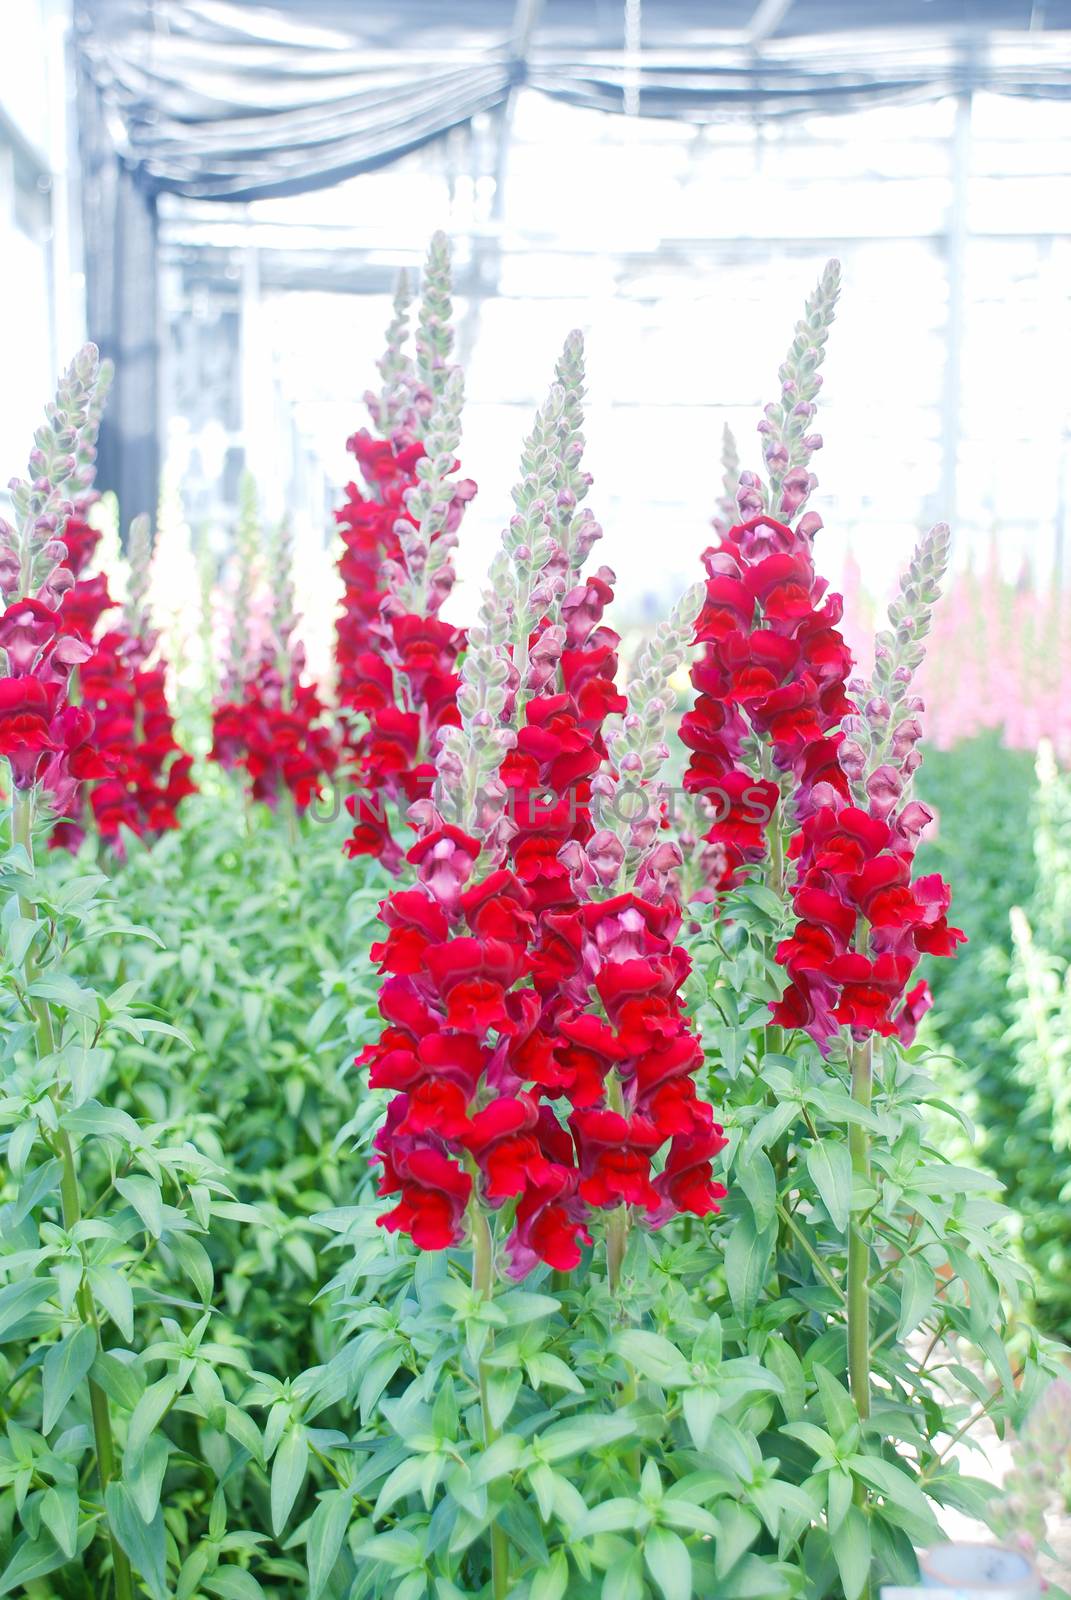 colorful Snap dragon (Antirrhinum majus) blooming in garden back by yuiyuize